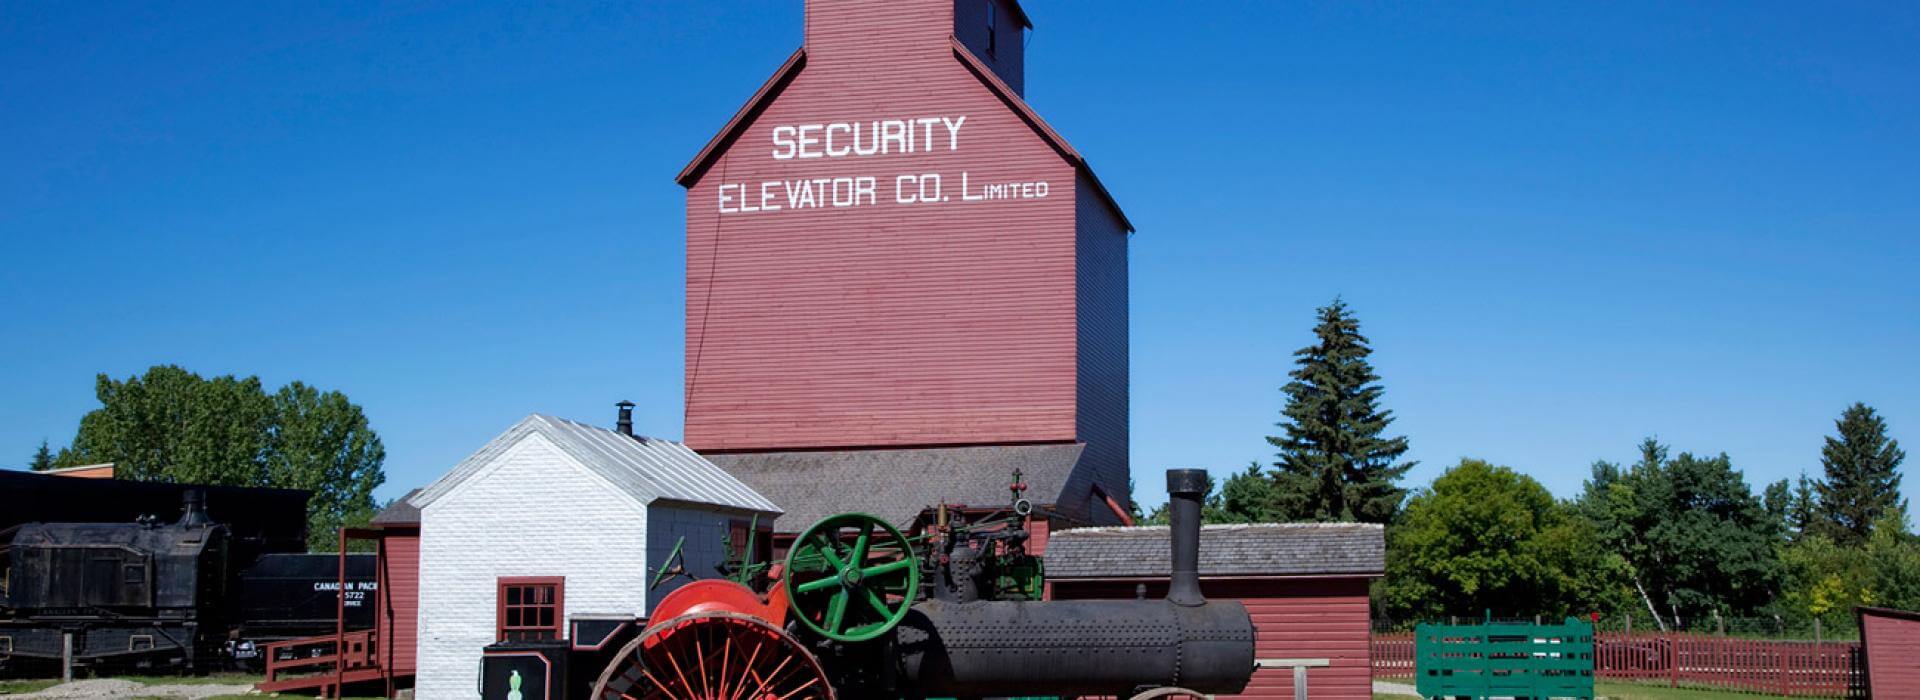 large red building with sign saying Security Gain Elevator